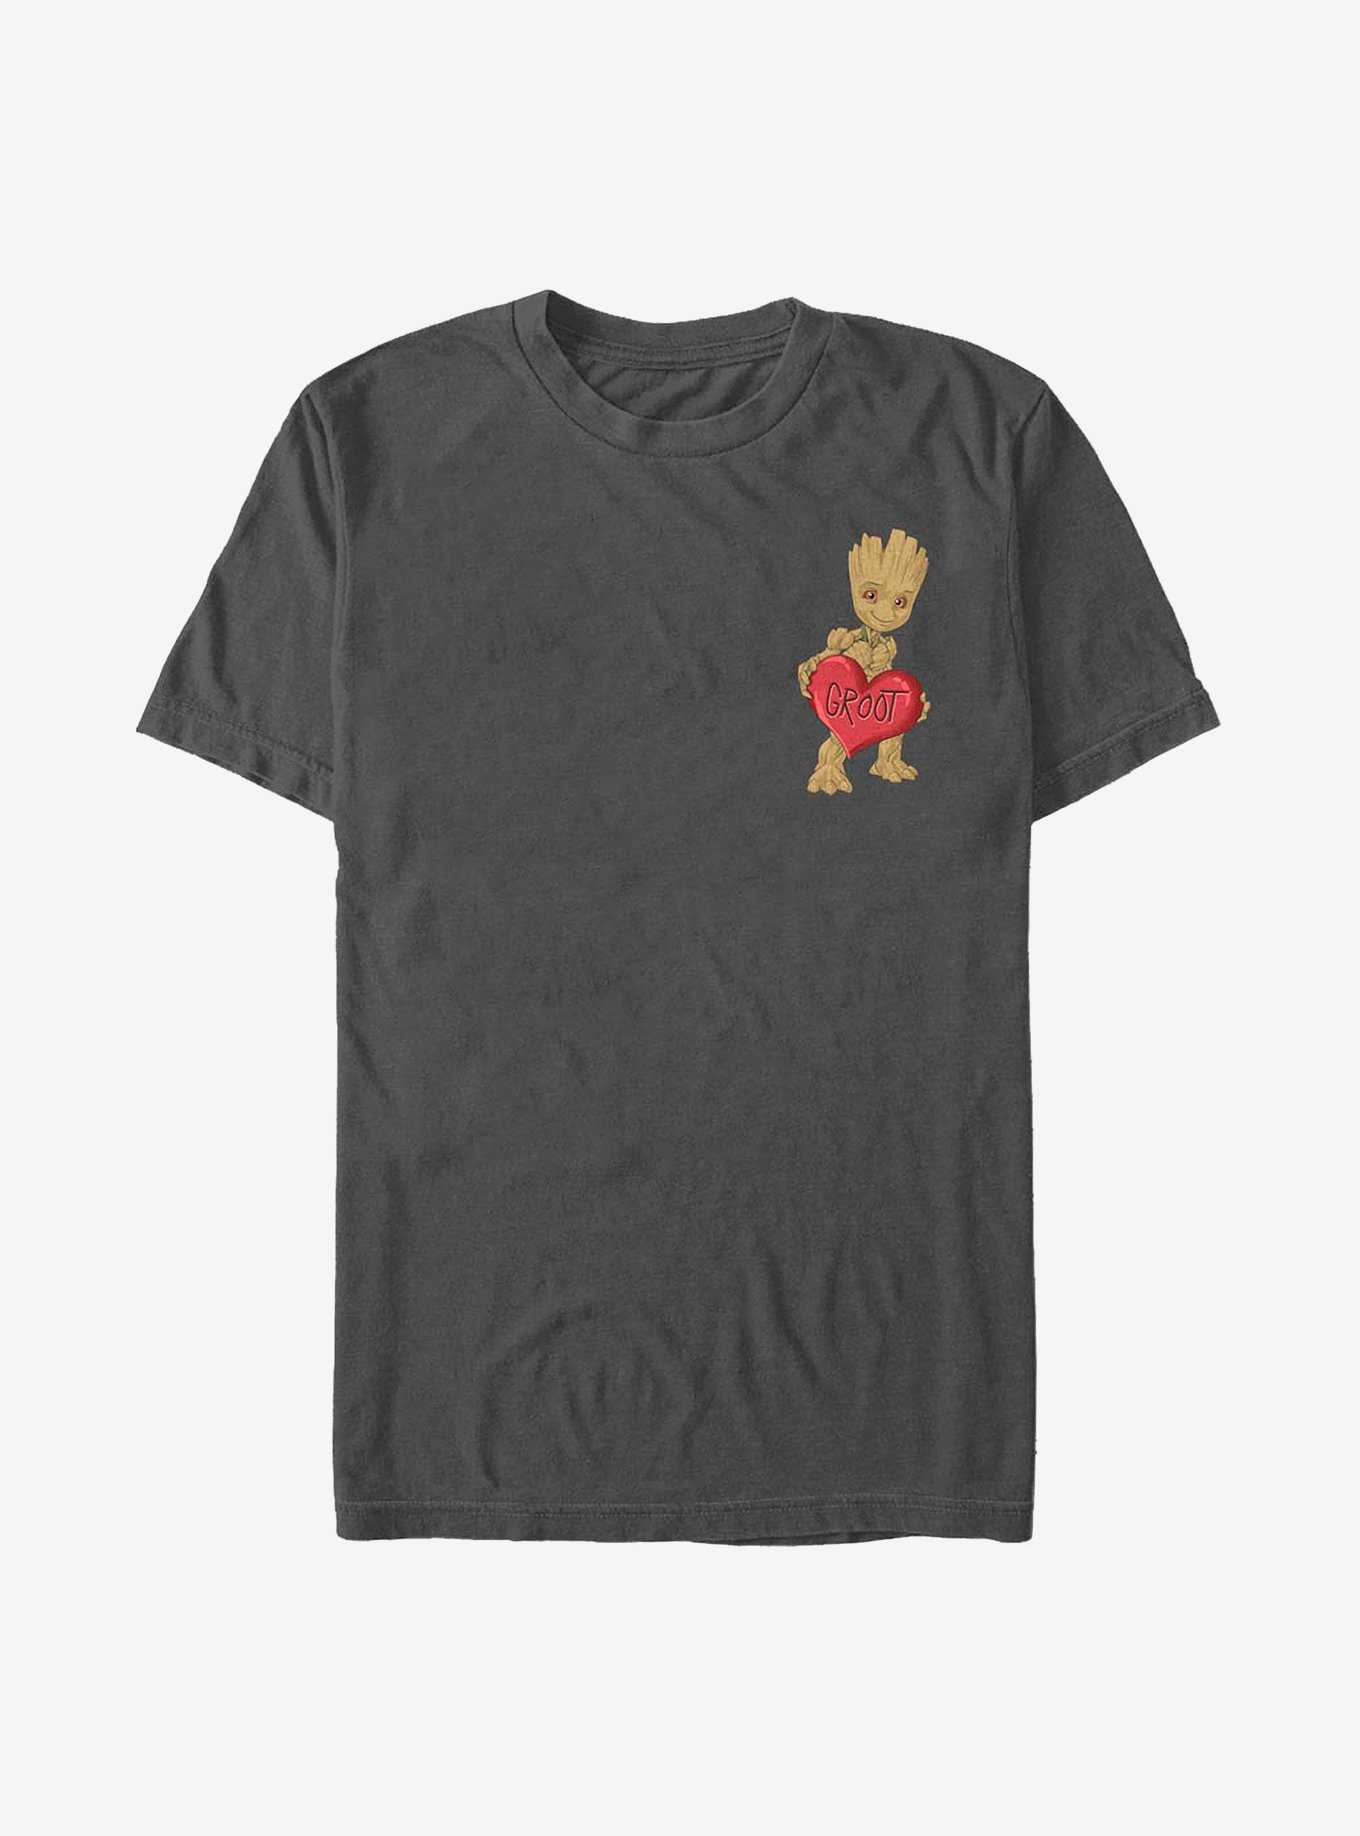 Marvel Guardians Of The Galaxy Groot Heart T-Shirt, CHARCOAL, hi-res